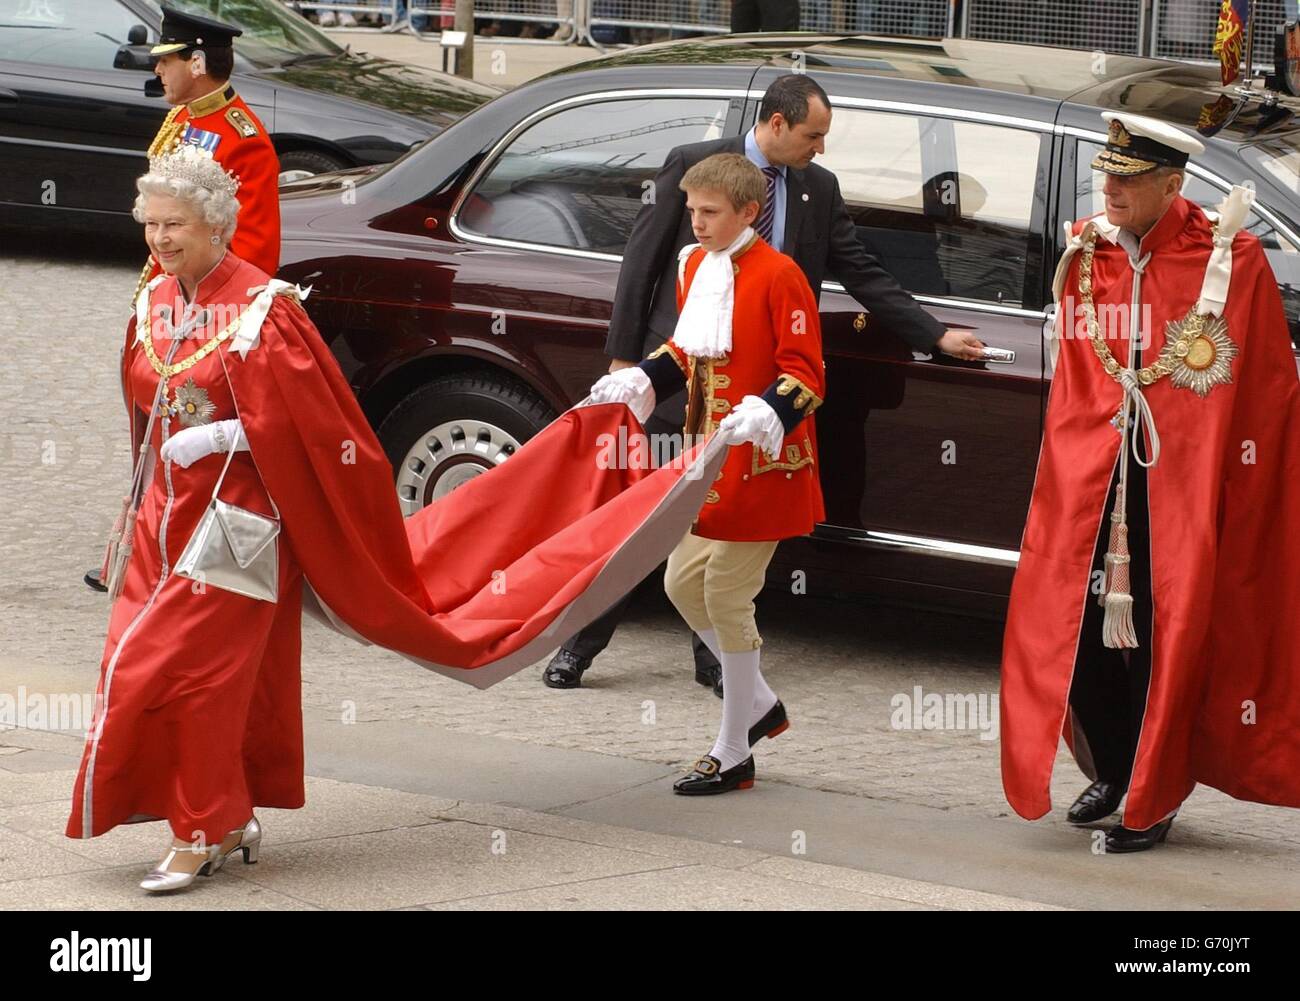 Queen Elizabeth II and the Duke of Edinburgh arrive at St Paul's Cathedral in central London to attend a service for the Order of the British Empire. The event, at which around 2,500 holders of KBE, CBE, MBE or OBE medals are present, is held every four years, with the Queen, as Sovereign of the Order of the British Empire, only attending every eight years. Stock Photo